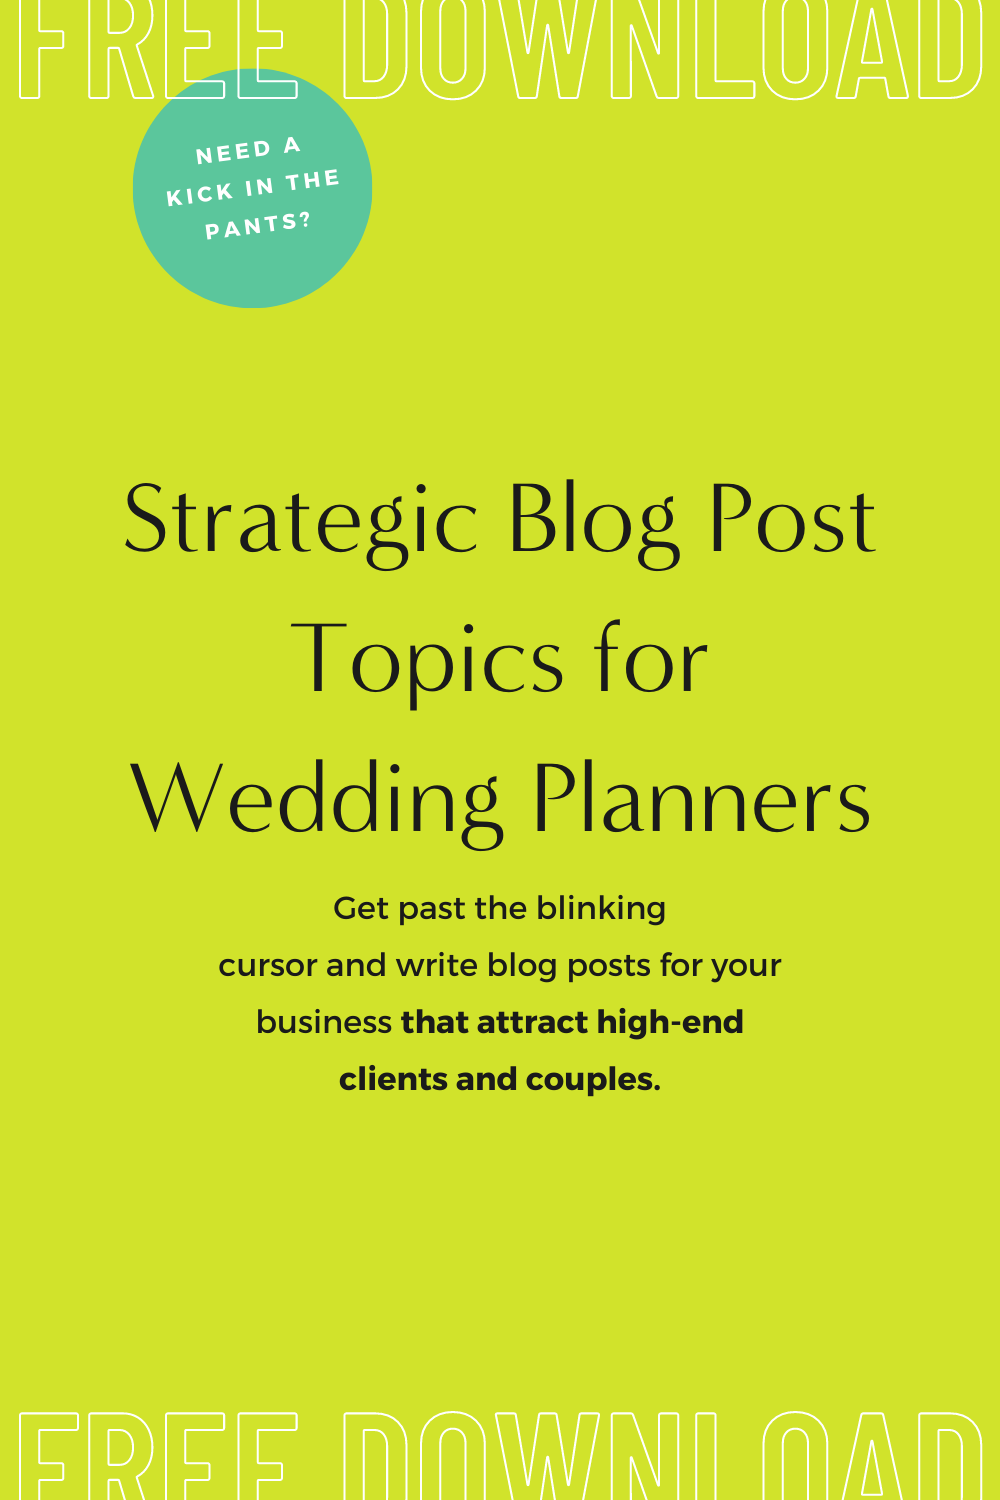 Get your hands on our exclusive list of 10 free wedding planner blog ideas. These topics are designed to rank highly on Google, ensuring you attract your ideal clients. Don't let the struggle for content slow you down; download our guide today and bring your blog to life!